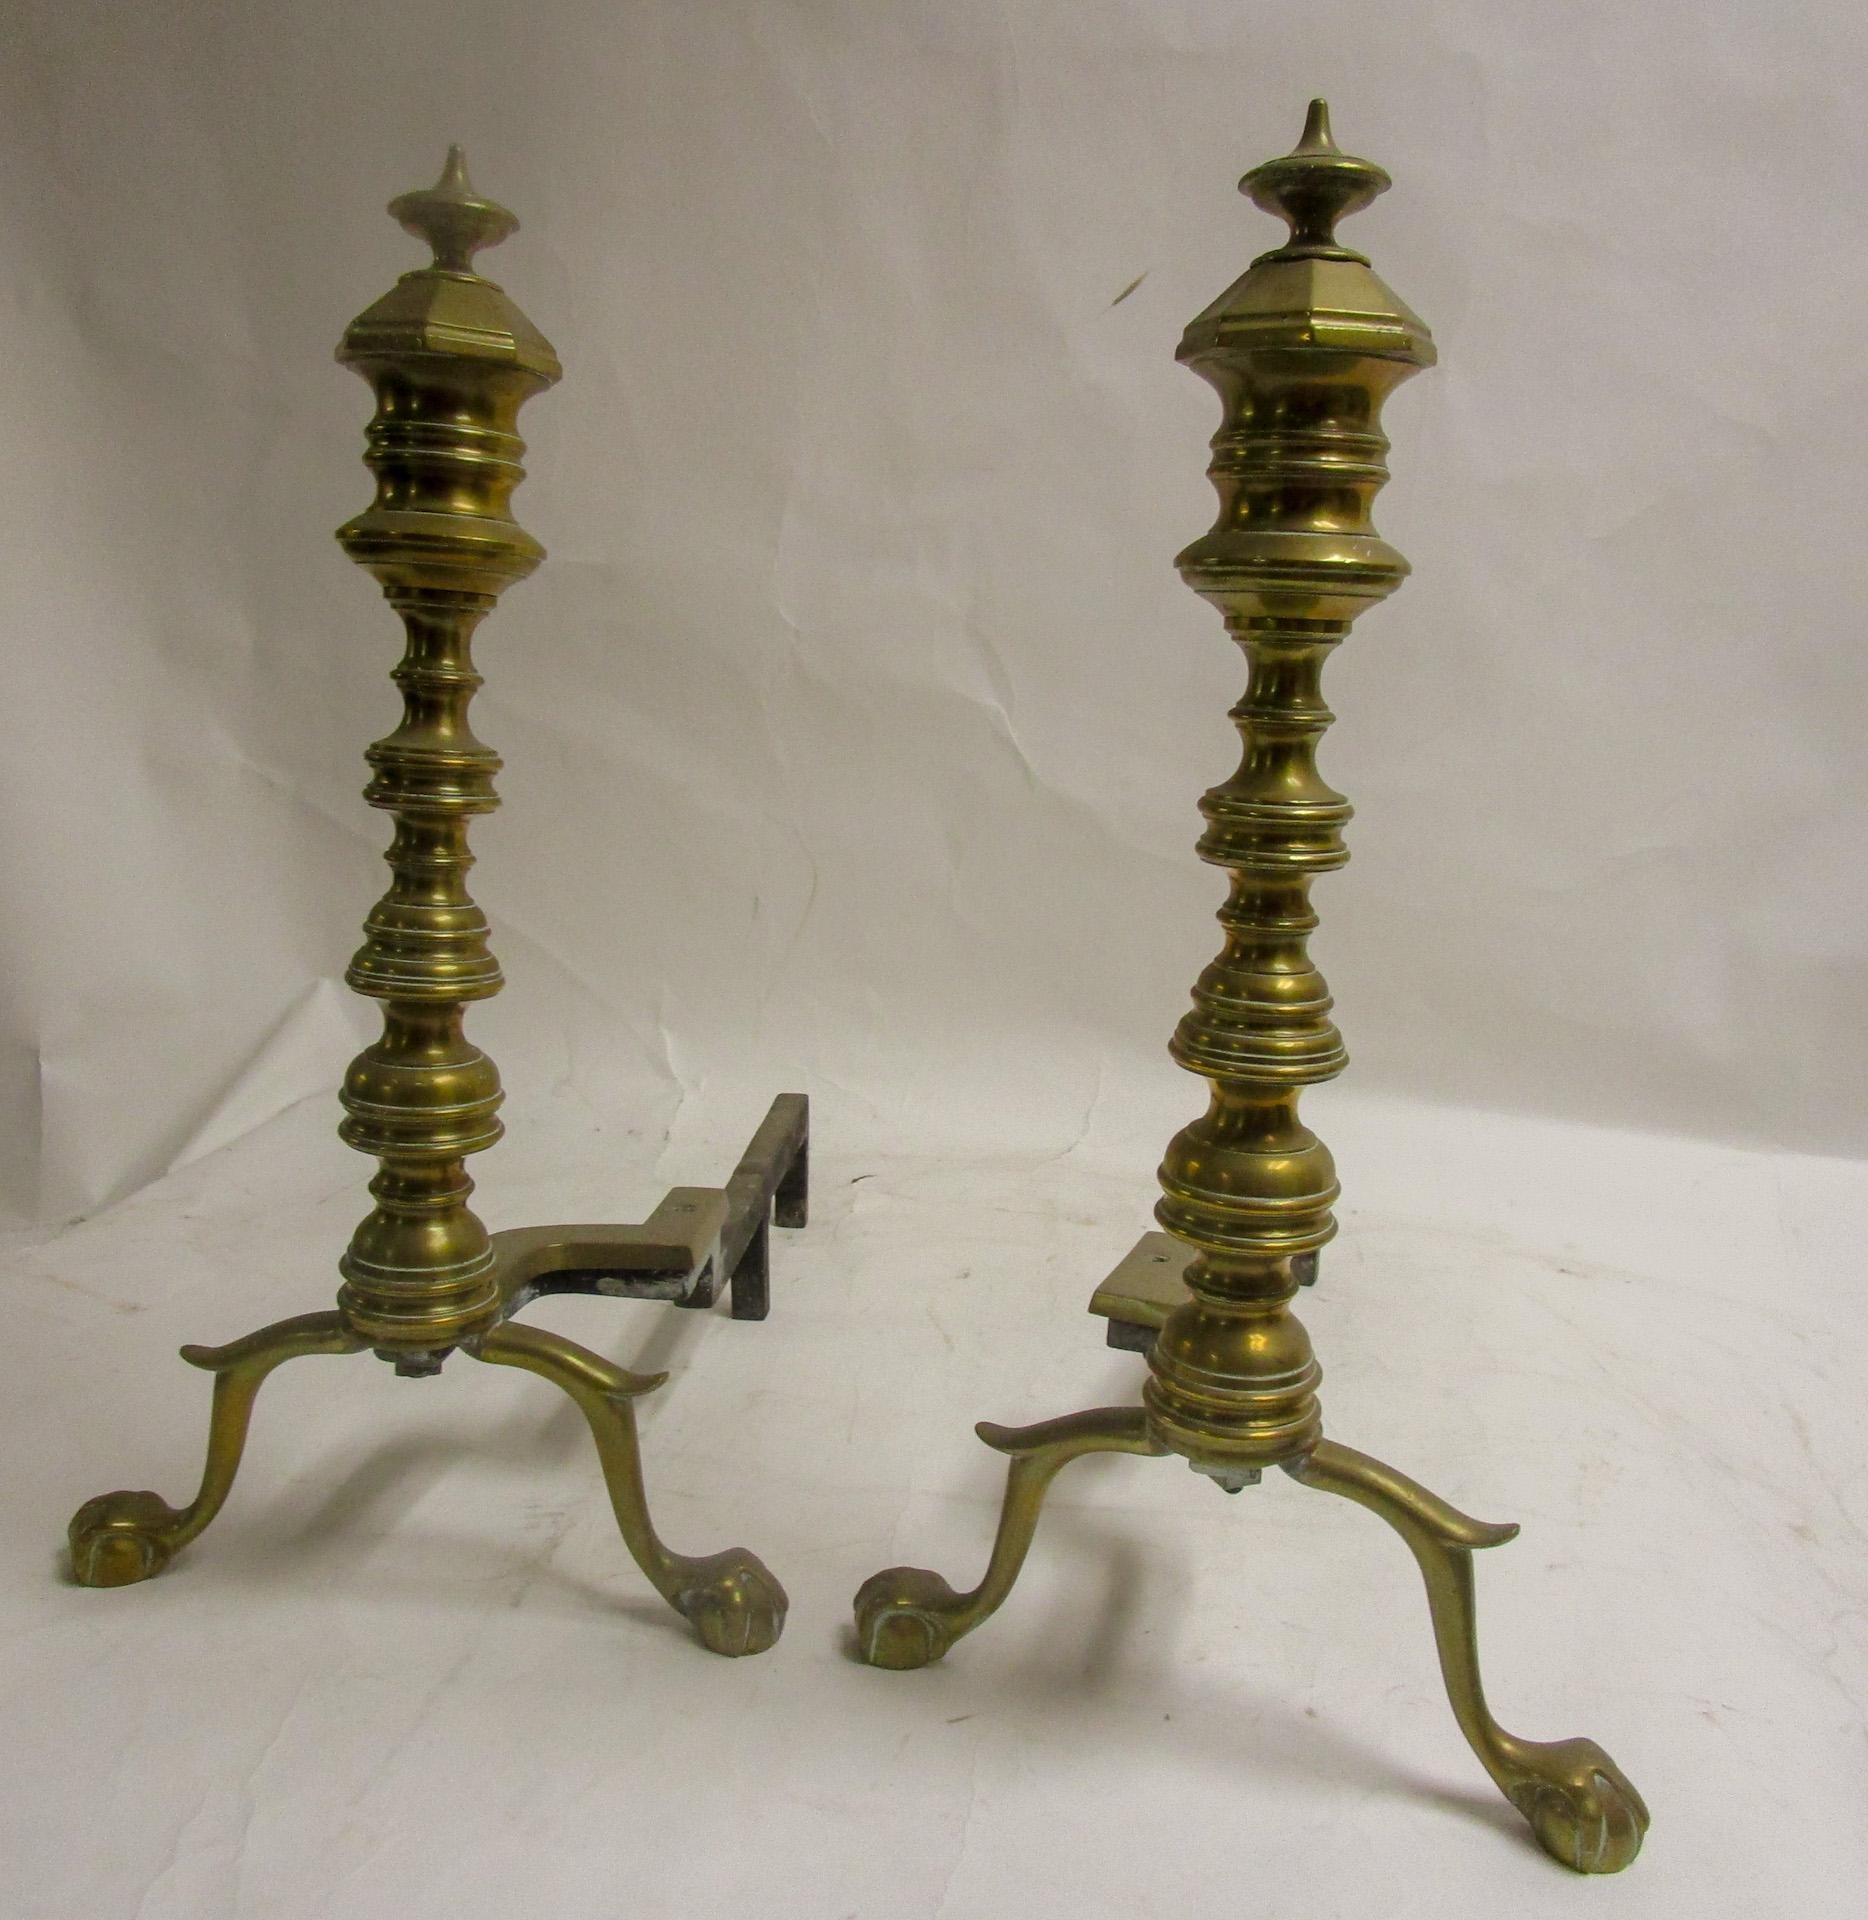 This late 19th century Victorian English brass andiron firedog pair feature ball and claw feet and mutiple turnings topped off by ornate finials.